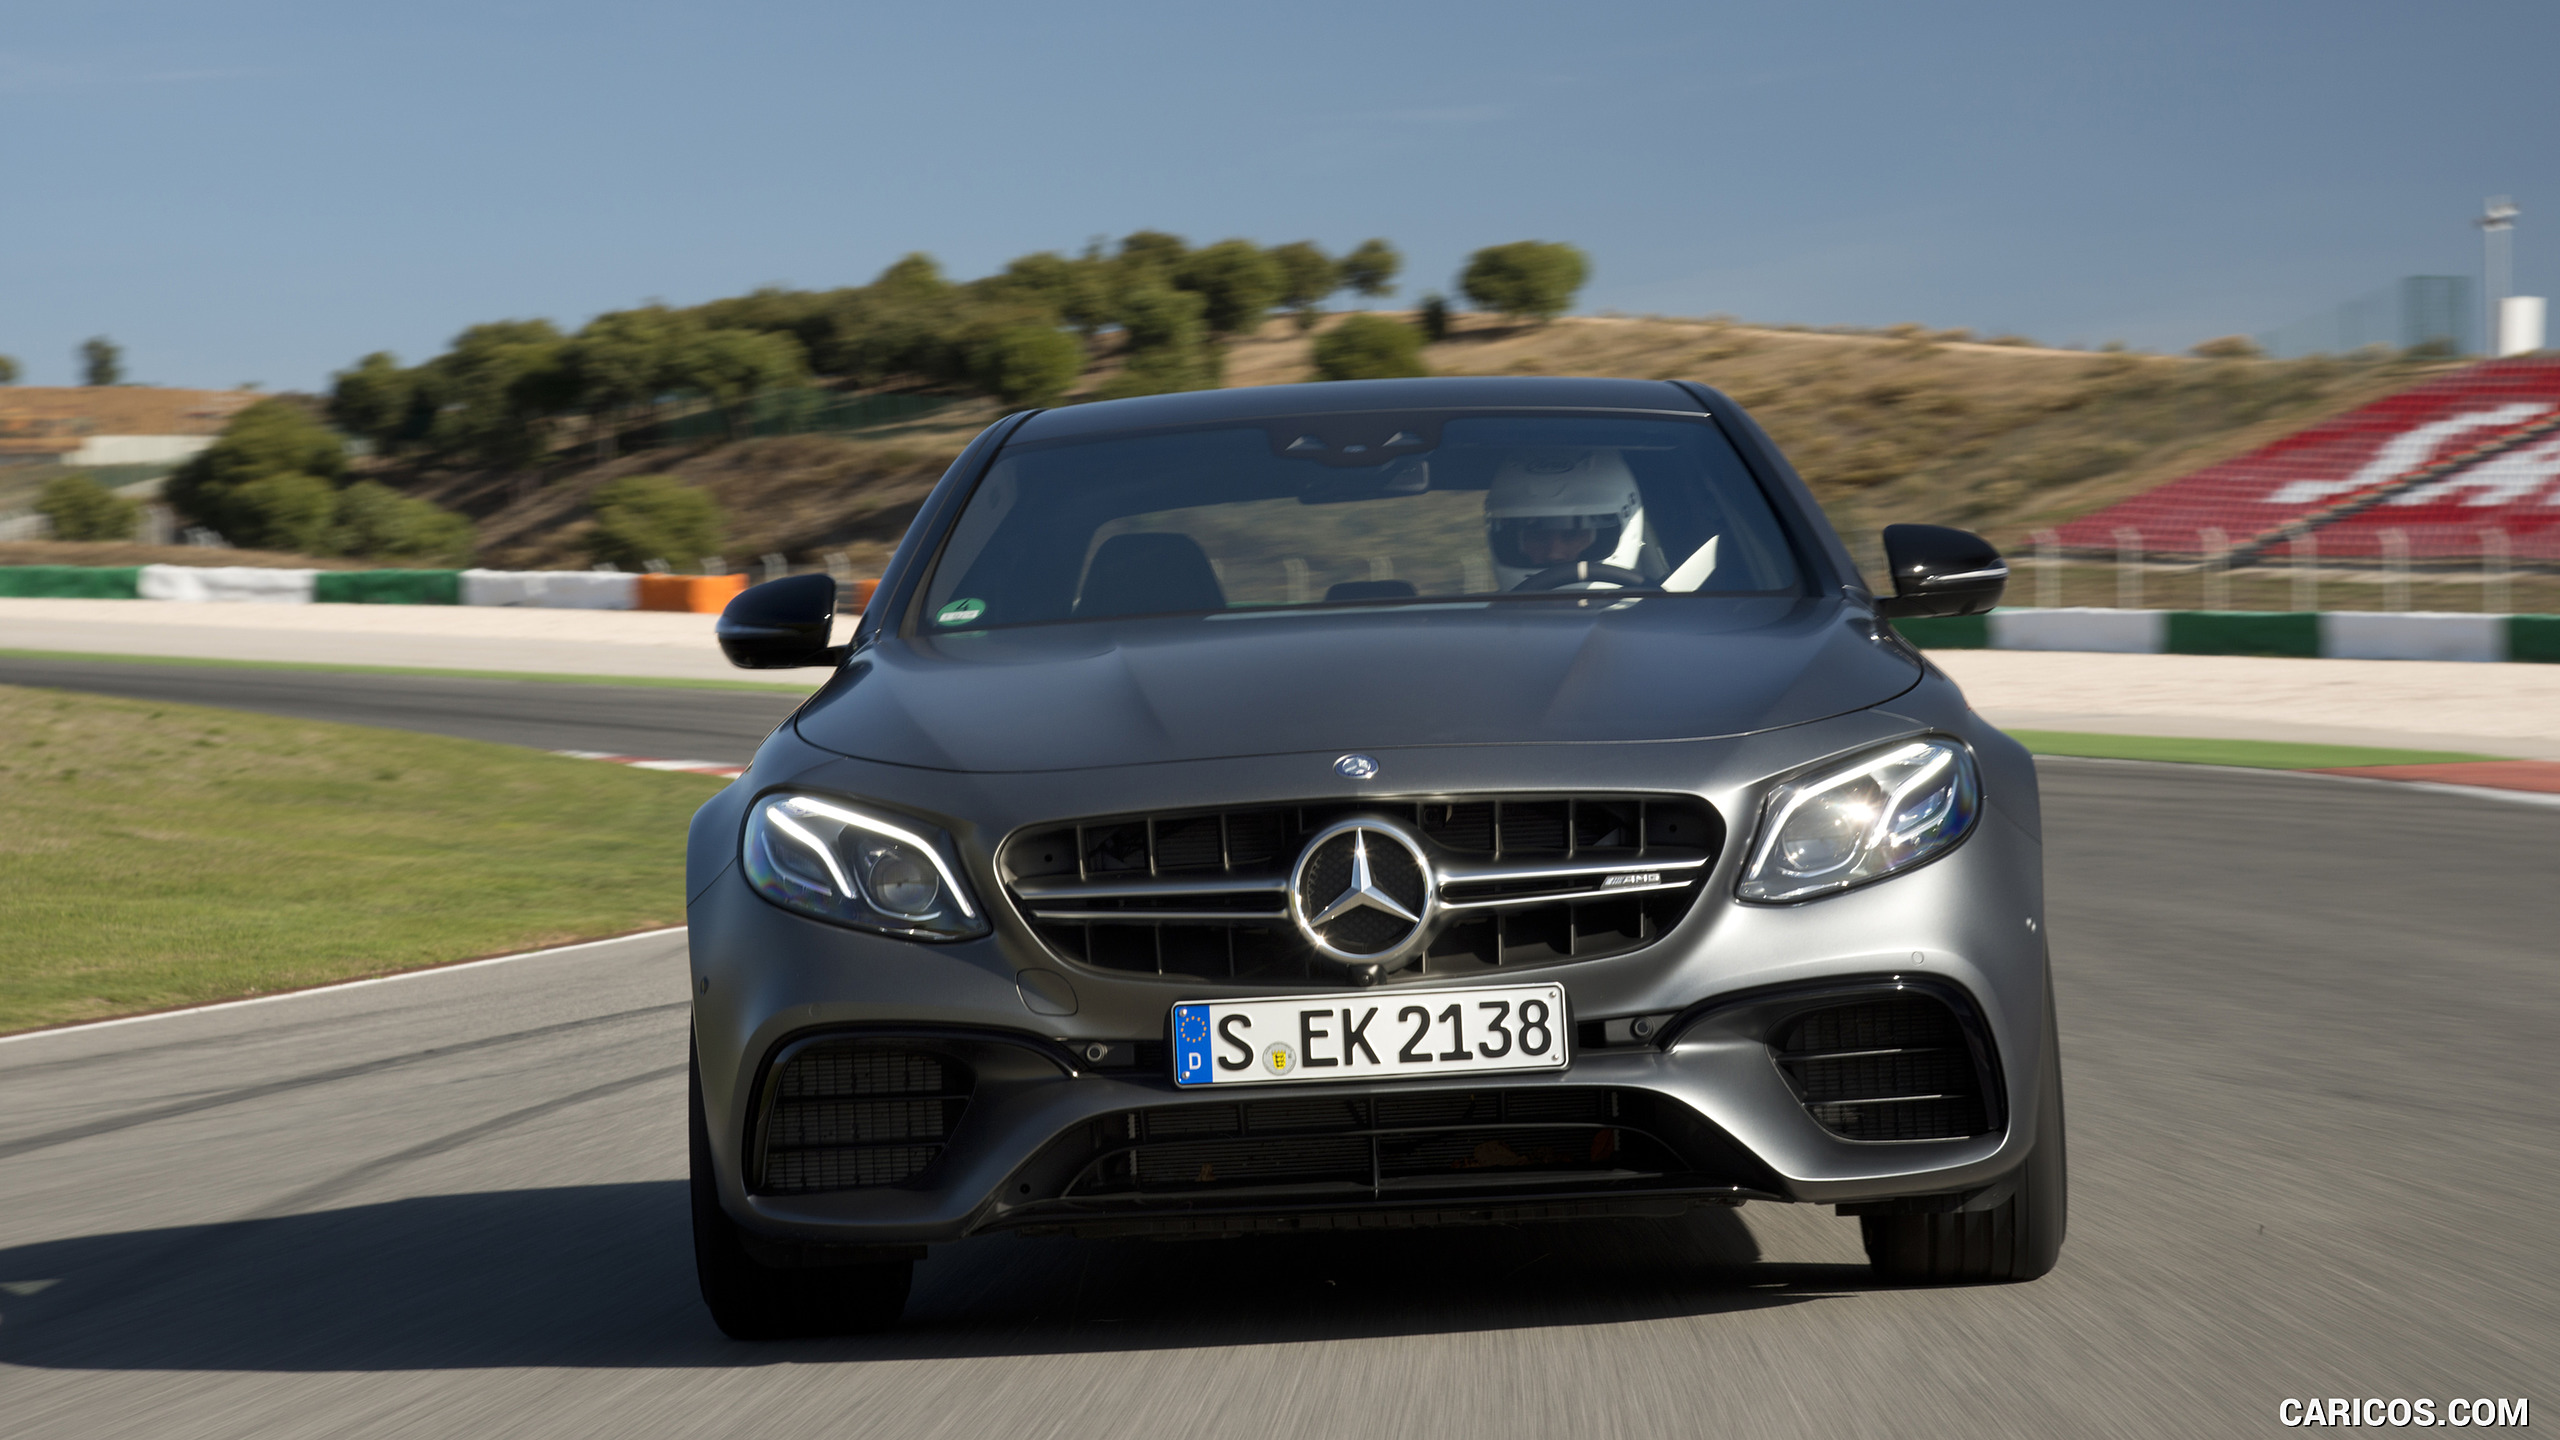 2018 Mercedes-AMG E63 S 4MATIC+ - Front, #265 of 323